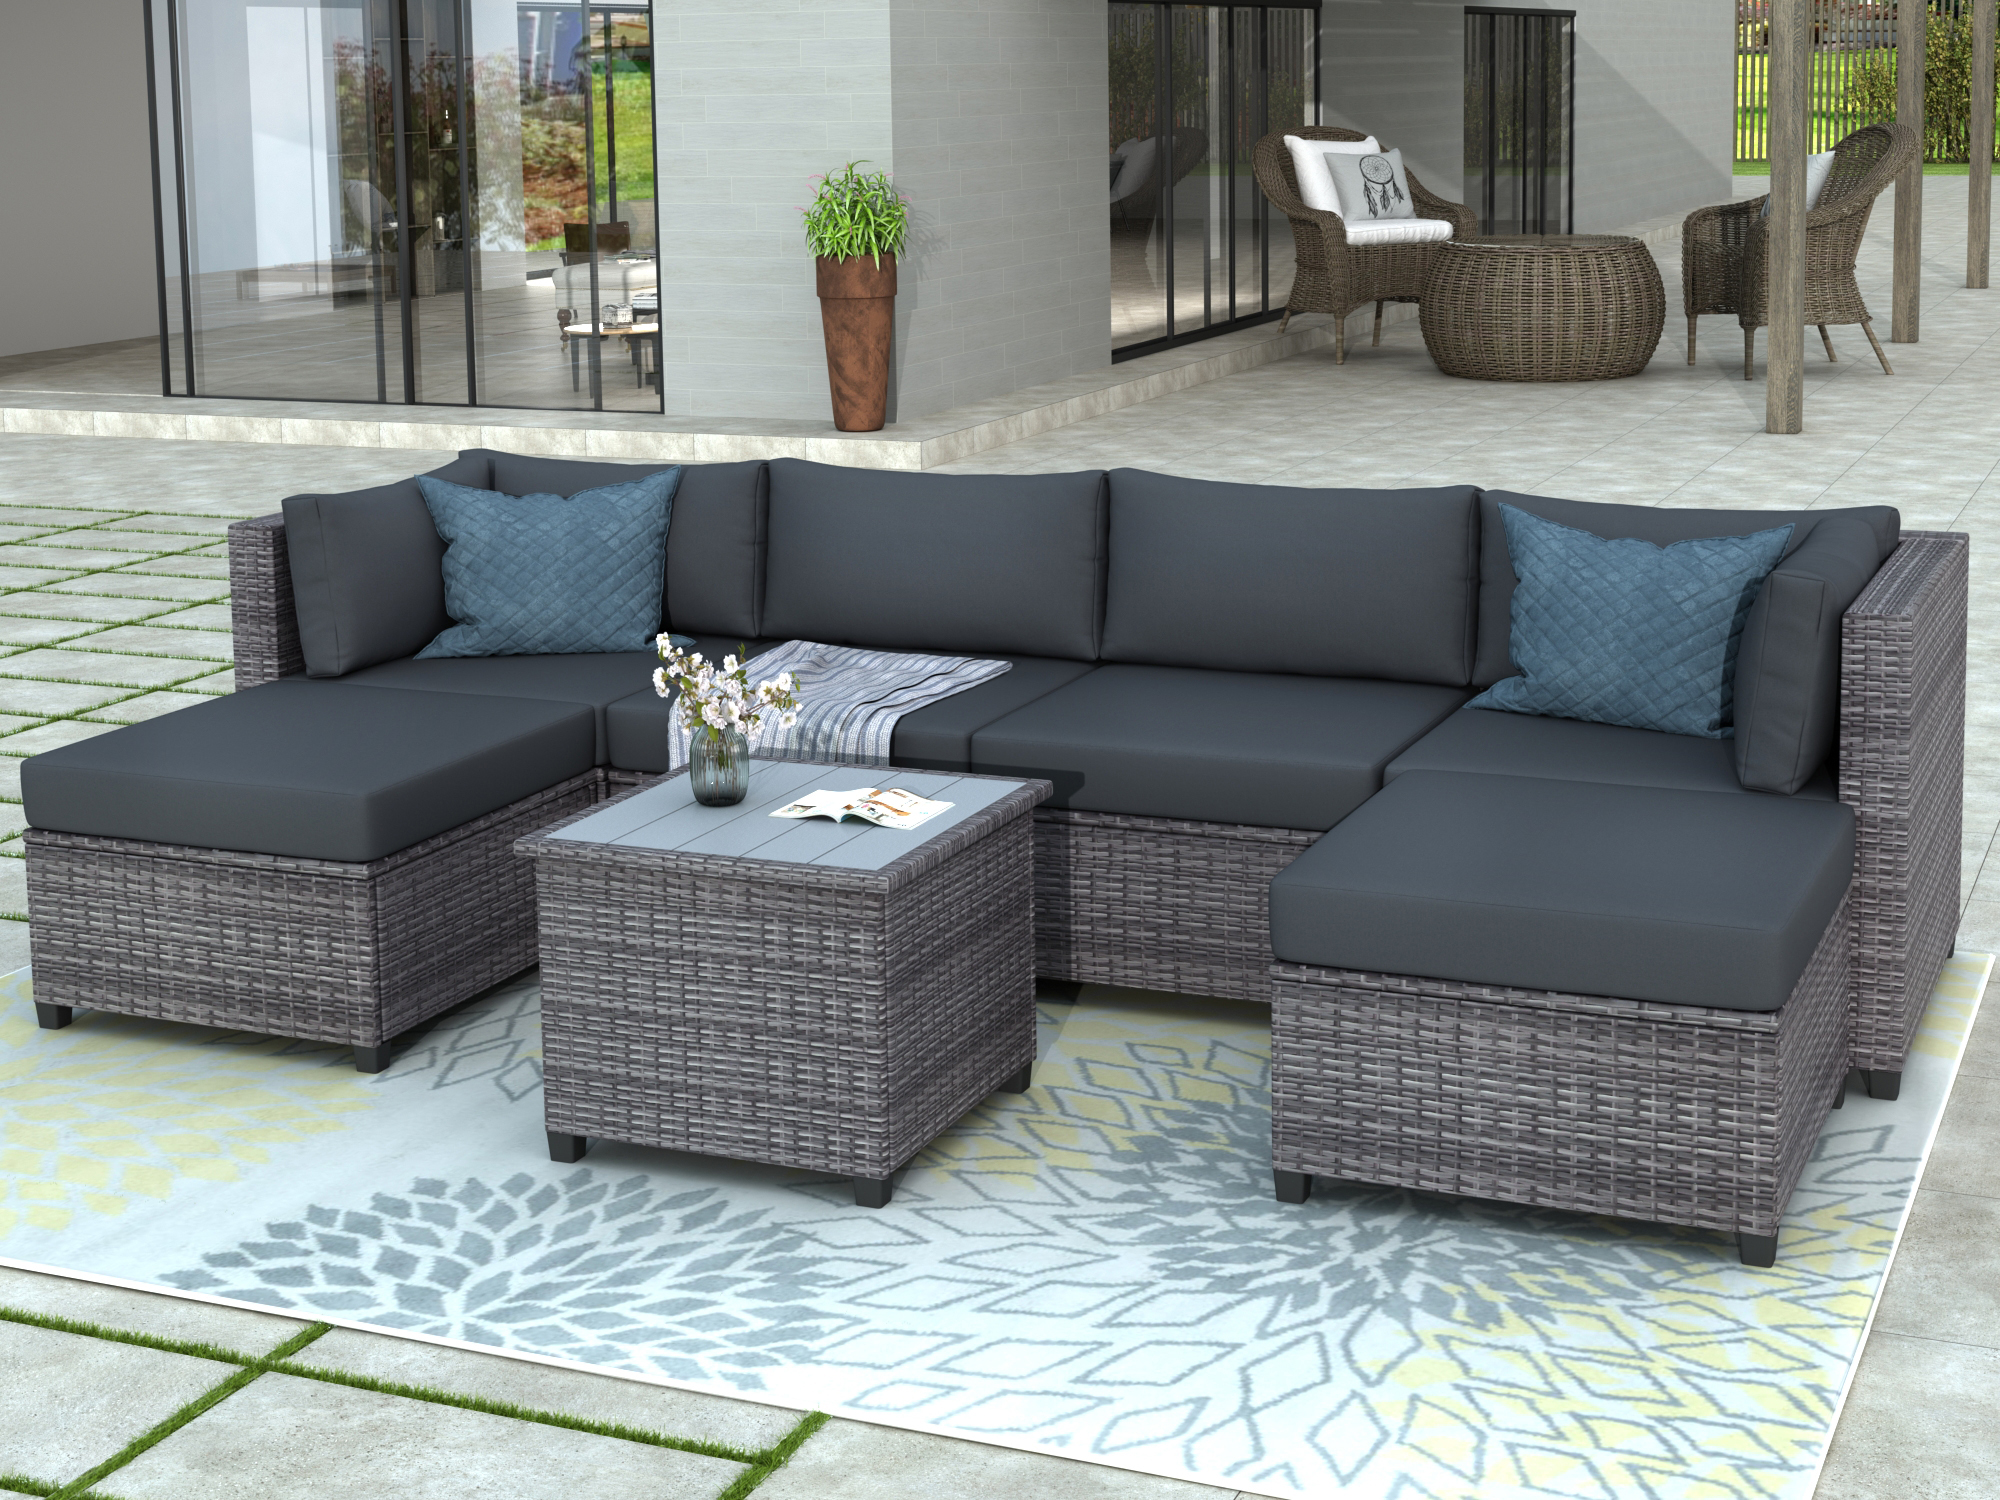 Wicker Patio Sets, 7 Piece Patio Furniture Sofa Sets with 4 PE Wicker Sofas, 2 Ottoman, Coffee Table, All-Weather Patio Conversation Set with Cushions for Backyard, Porch, Garden, Poolside, LLL39 - image 1 of 10